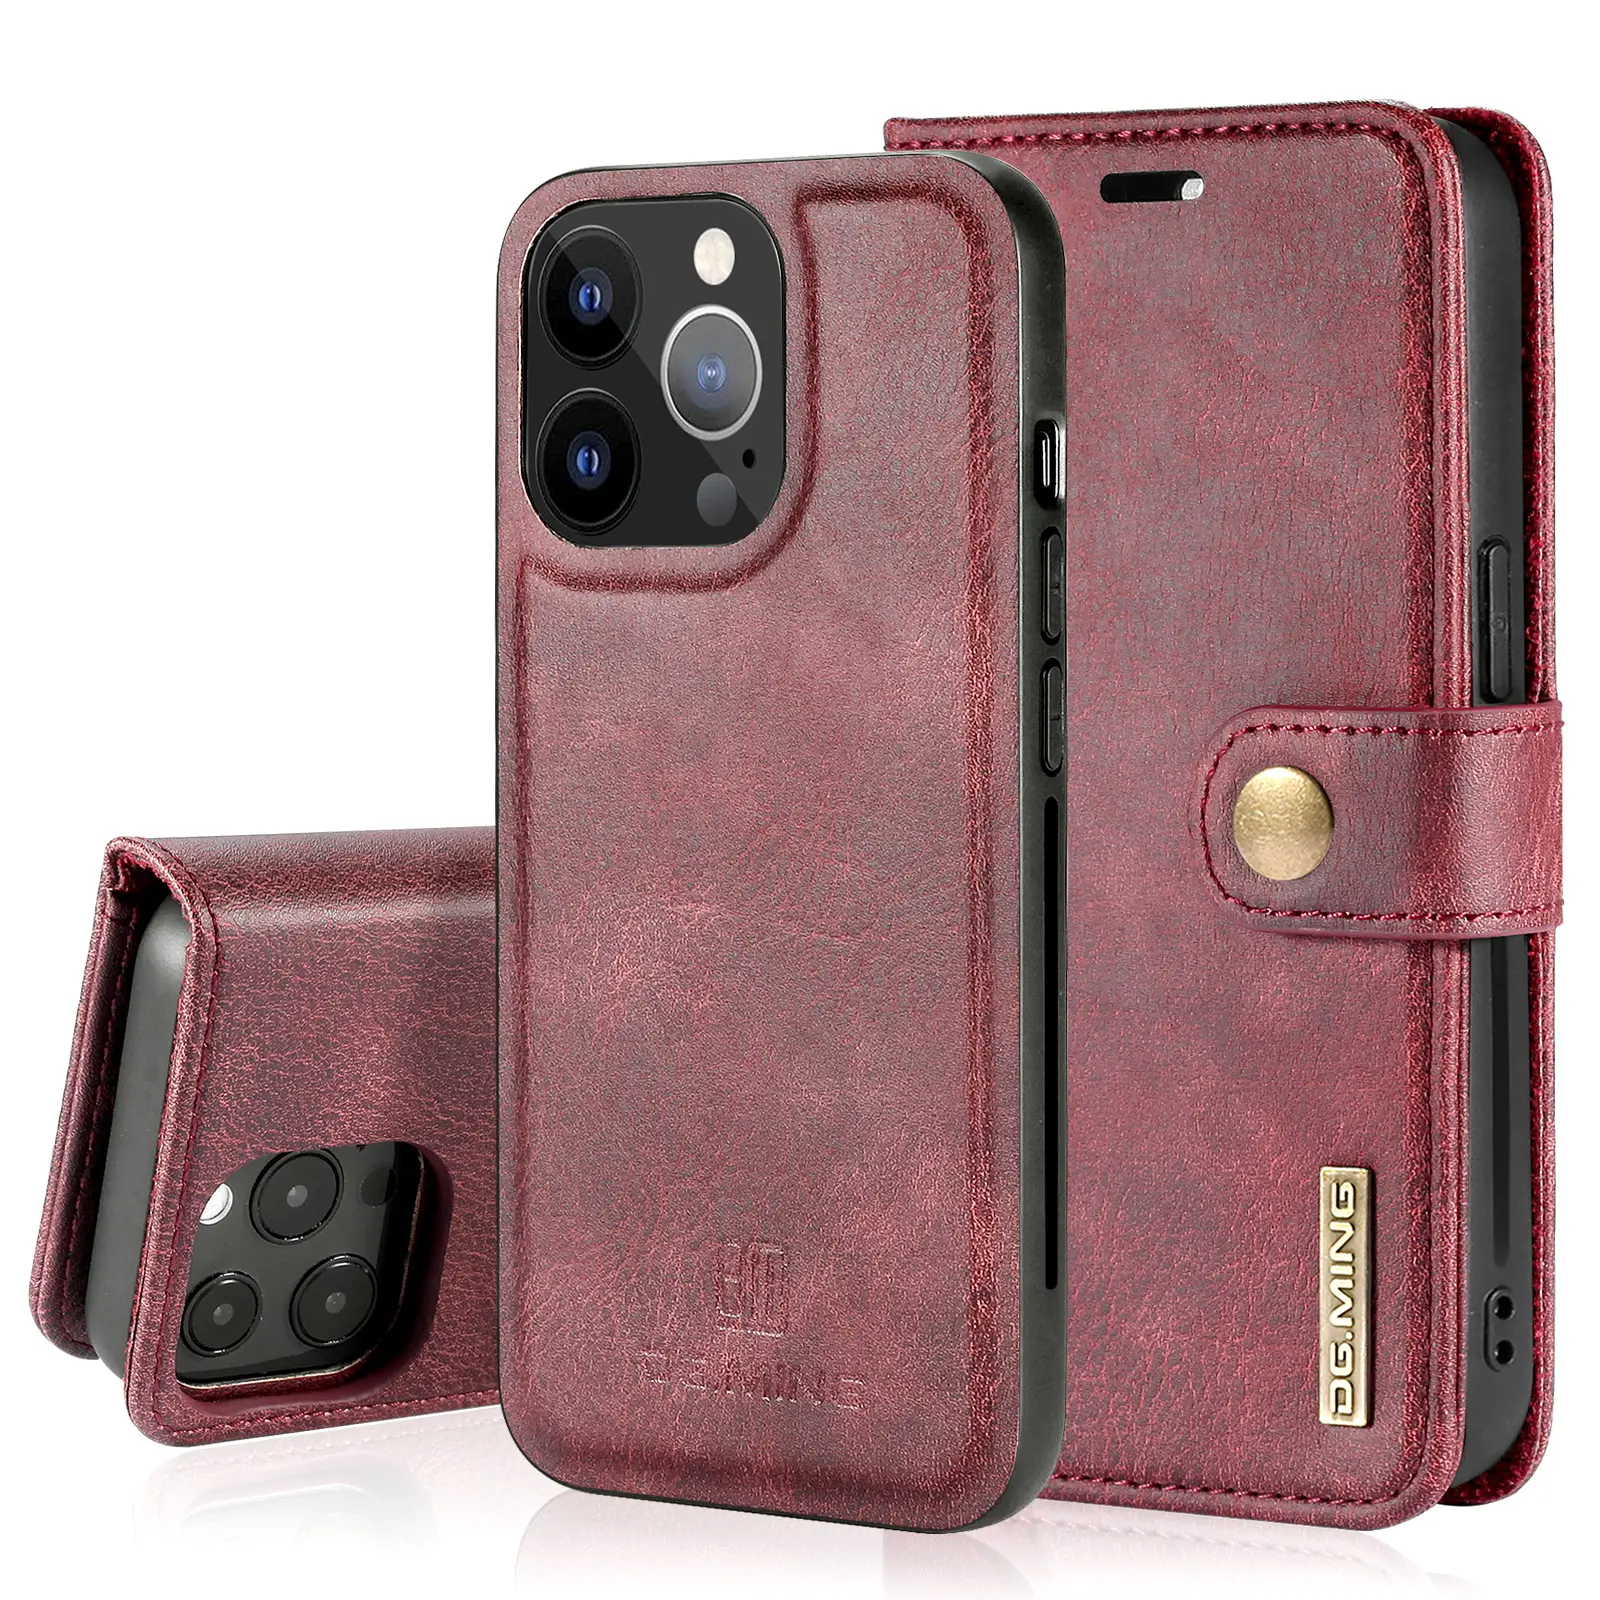 DG.MING Luxury Genuine Leather Flip Wallet Phone Case Magnetic Flip Case For oneplus 1+6 1+ 8Pro 1+8T PU Leather Book Flip Cover